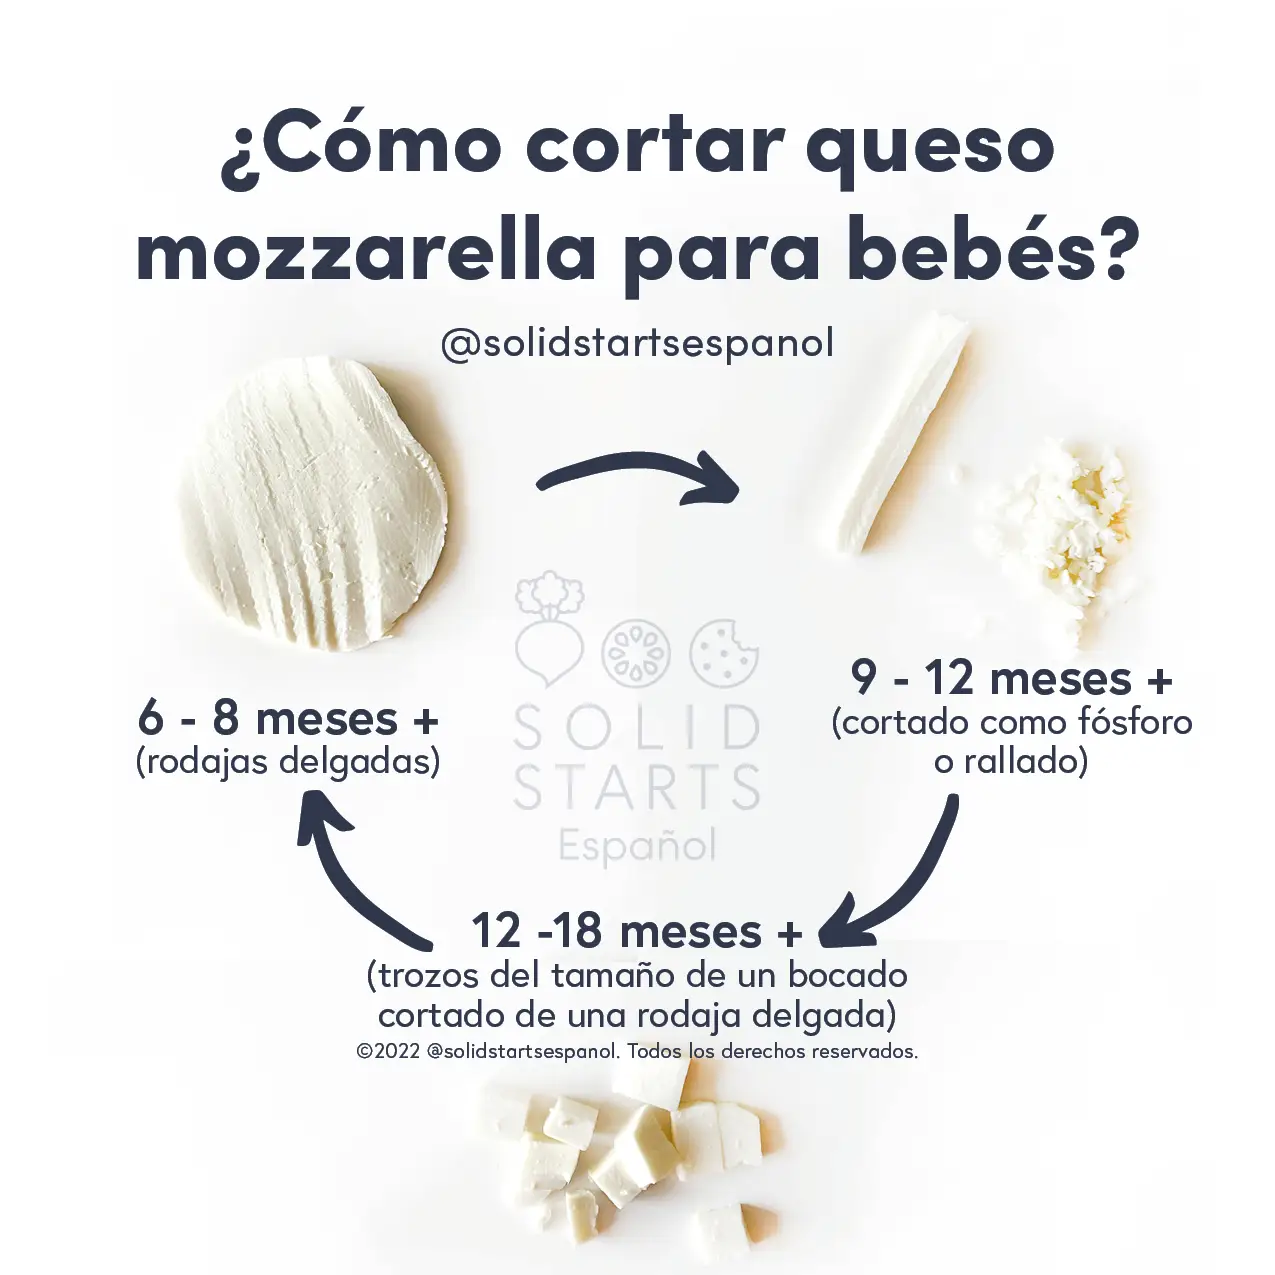 infographic titled "How to Cut Mozzarella for Babies," showing images of mozzarella cheese cut for different age ranges. Thin slices for 6-8 months+, shredded or matchstick sized pieces for 9-12 months+, and bite sized pieces for 12-18 months+